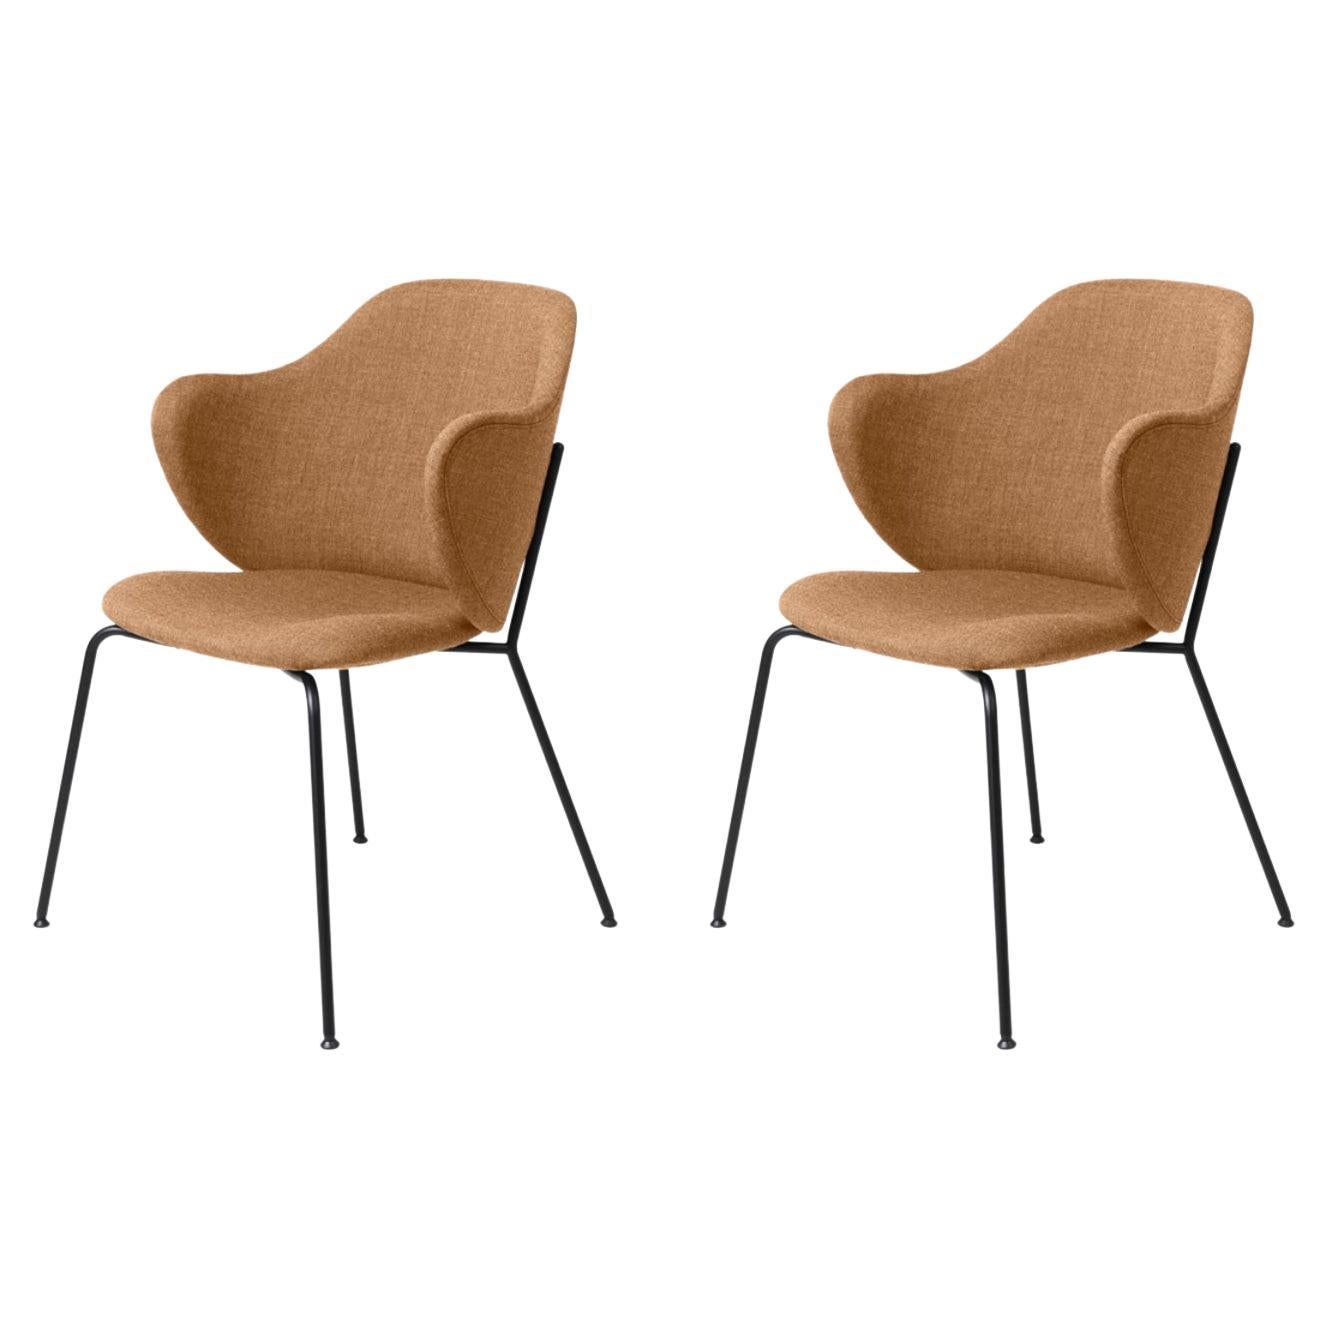 Set of 2 Brown Remix Lassen Chairs by Lassen For Sale